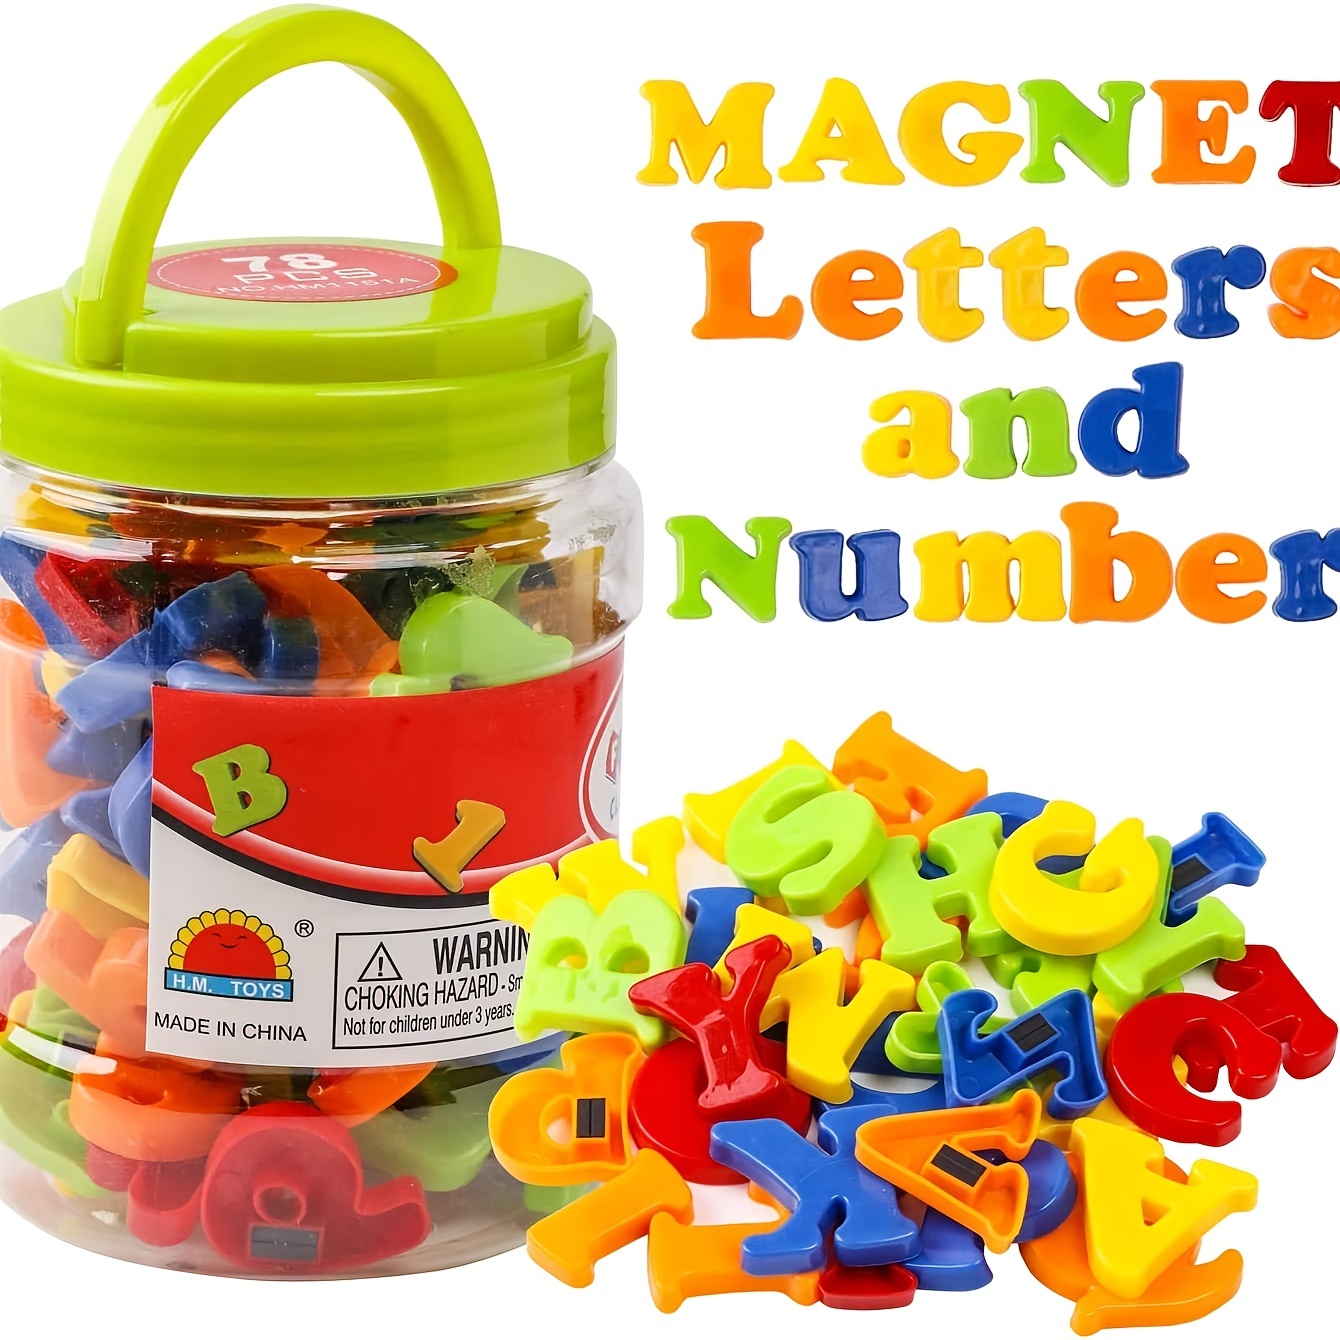 

Magnetic Letters Numbers Alphabet Abc Colorful 123 Refrigerator Fridge Magnets For Vocabulary Educational Toy Set Preschool Learning Spelling Counting Game Uppercase Lowercase For Kids